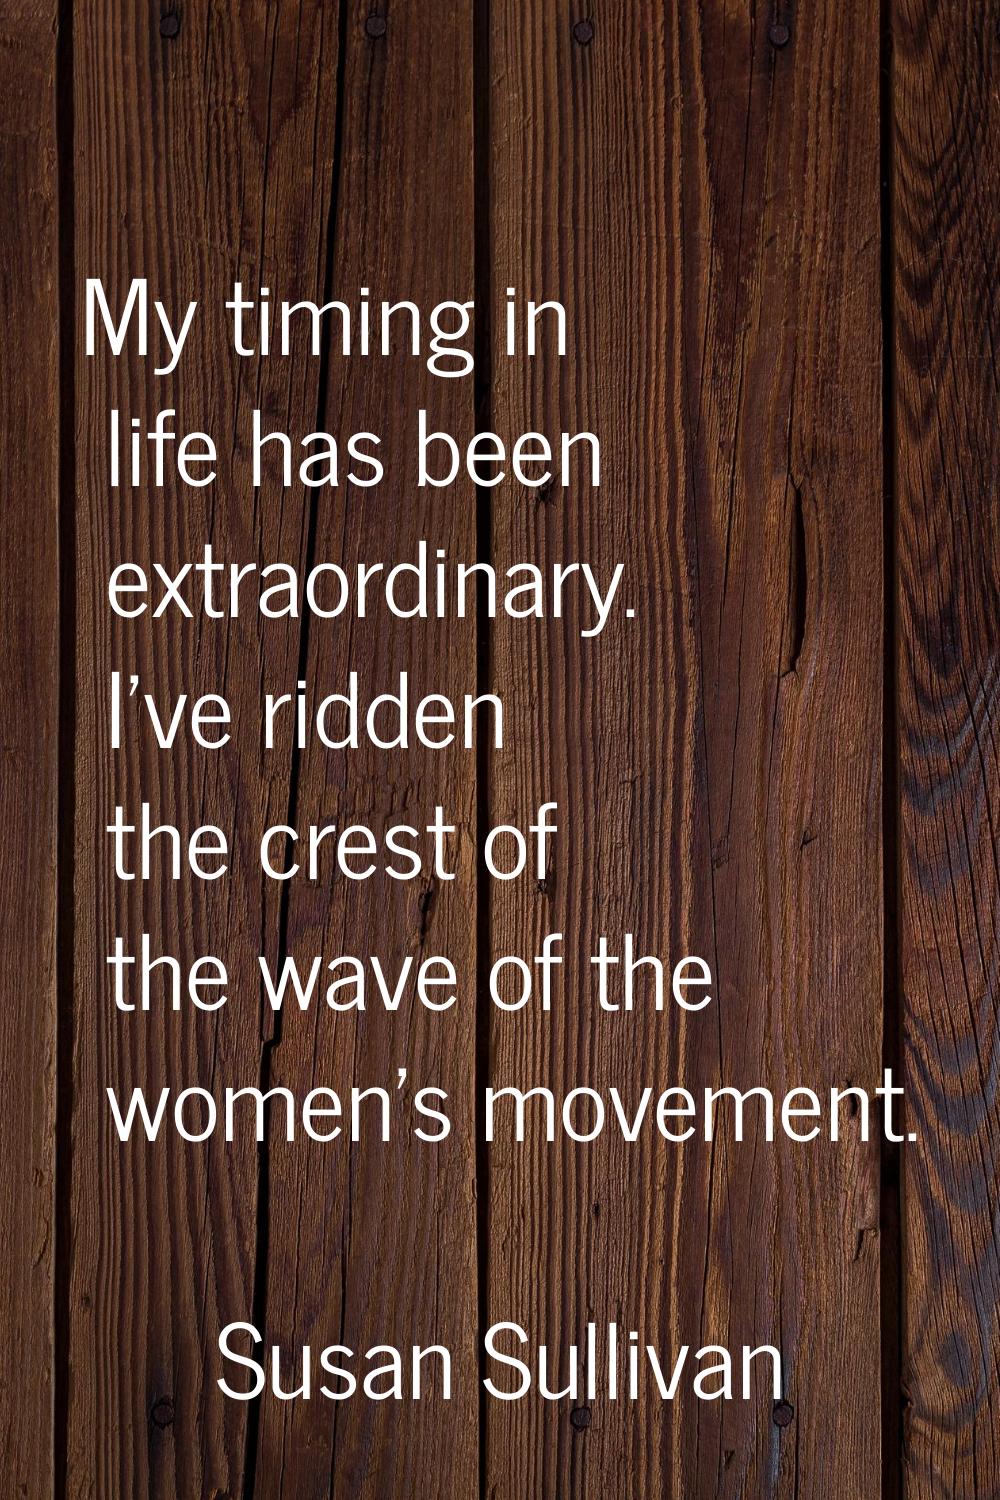 My timing in life has been extraordinary. I've ridden the crest of the wave of the women's movement